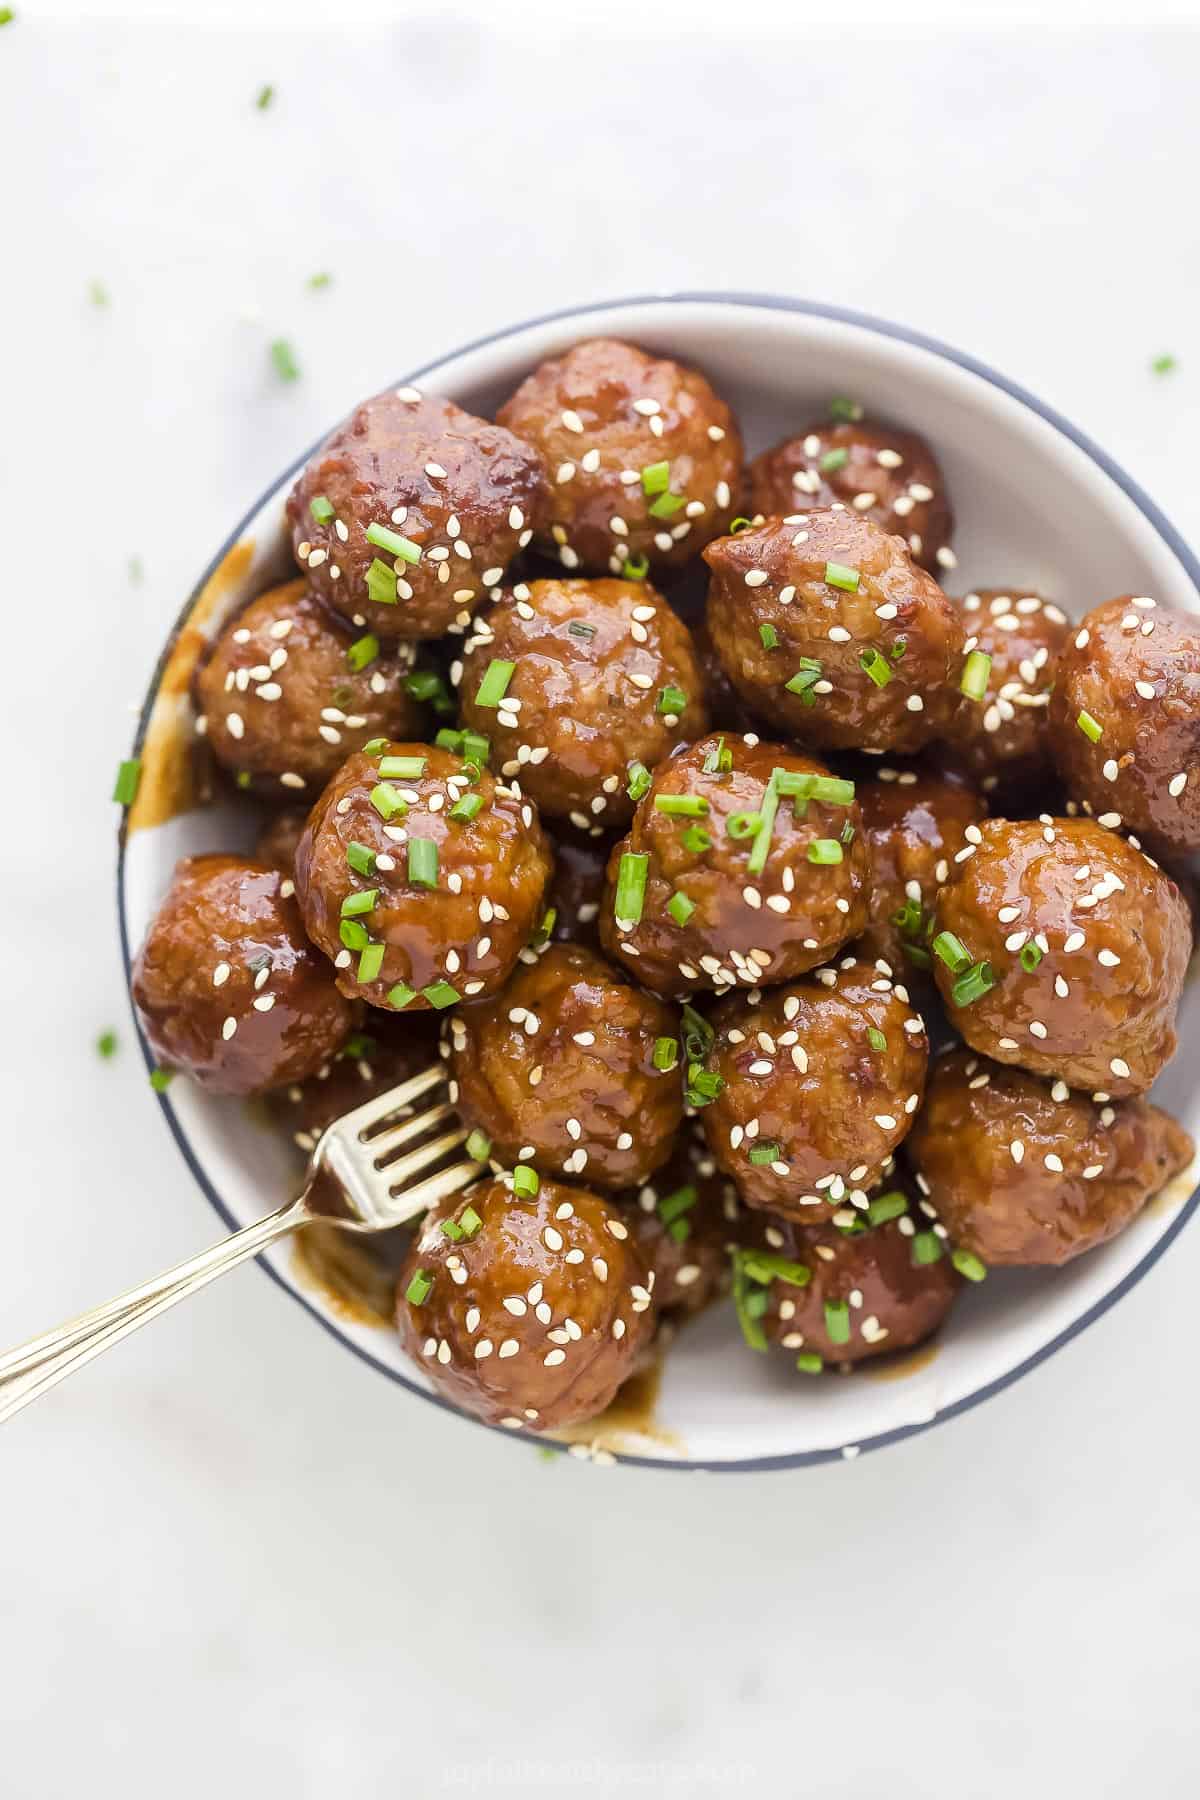 A bowl full of Crockpot Asian meatballs garnished with chopped chives and sesame seeds